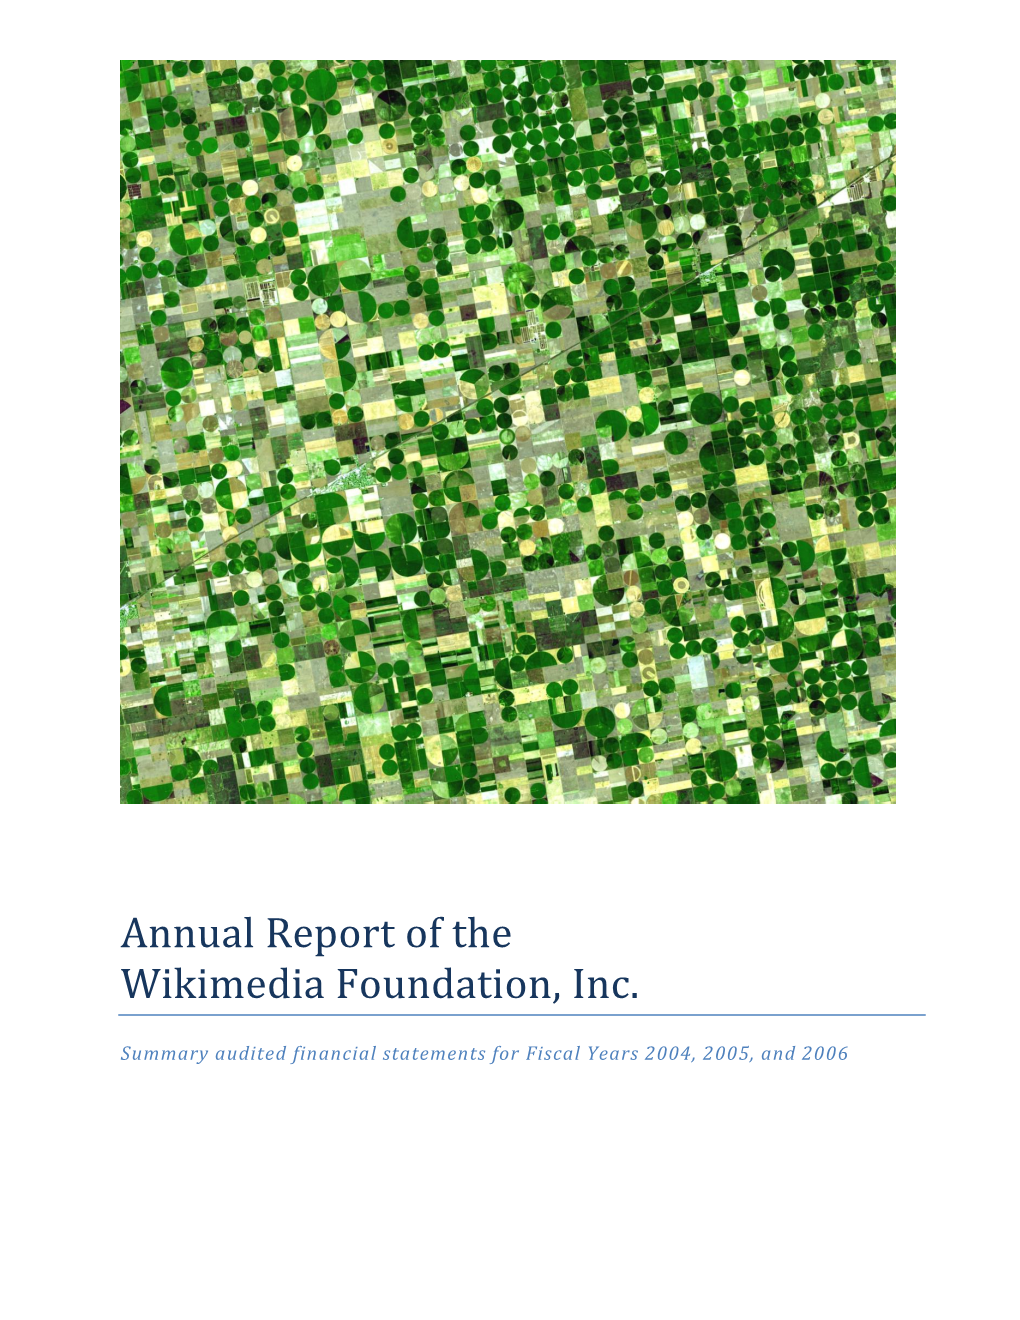 Annual Report of the Wikimedia Foundation, Inc